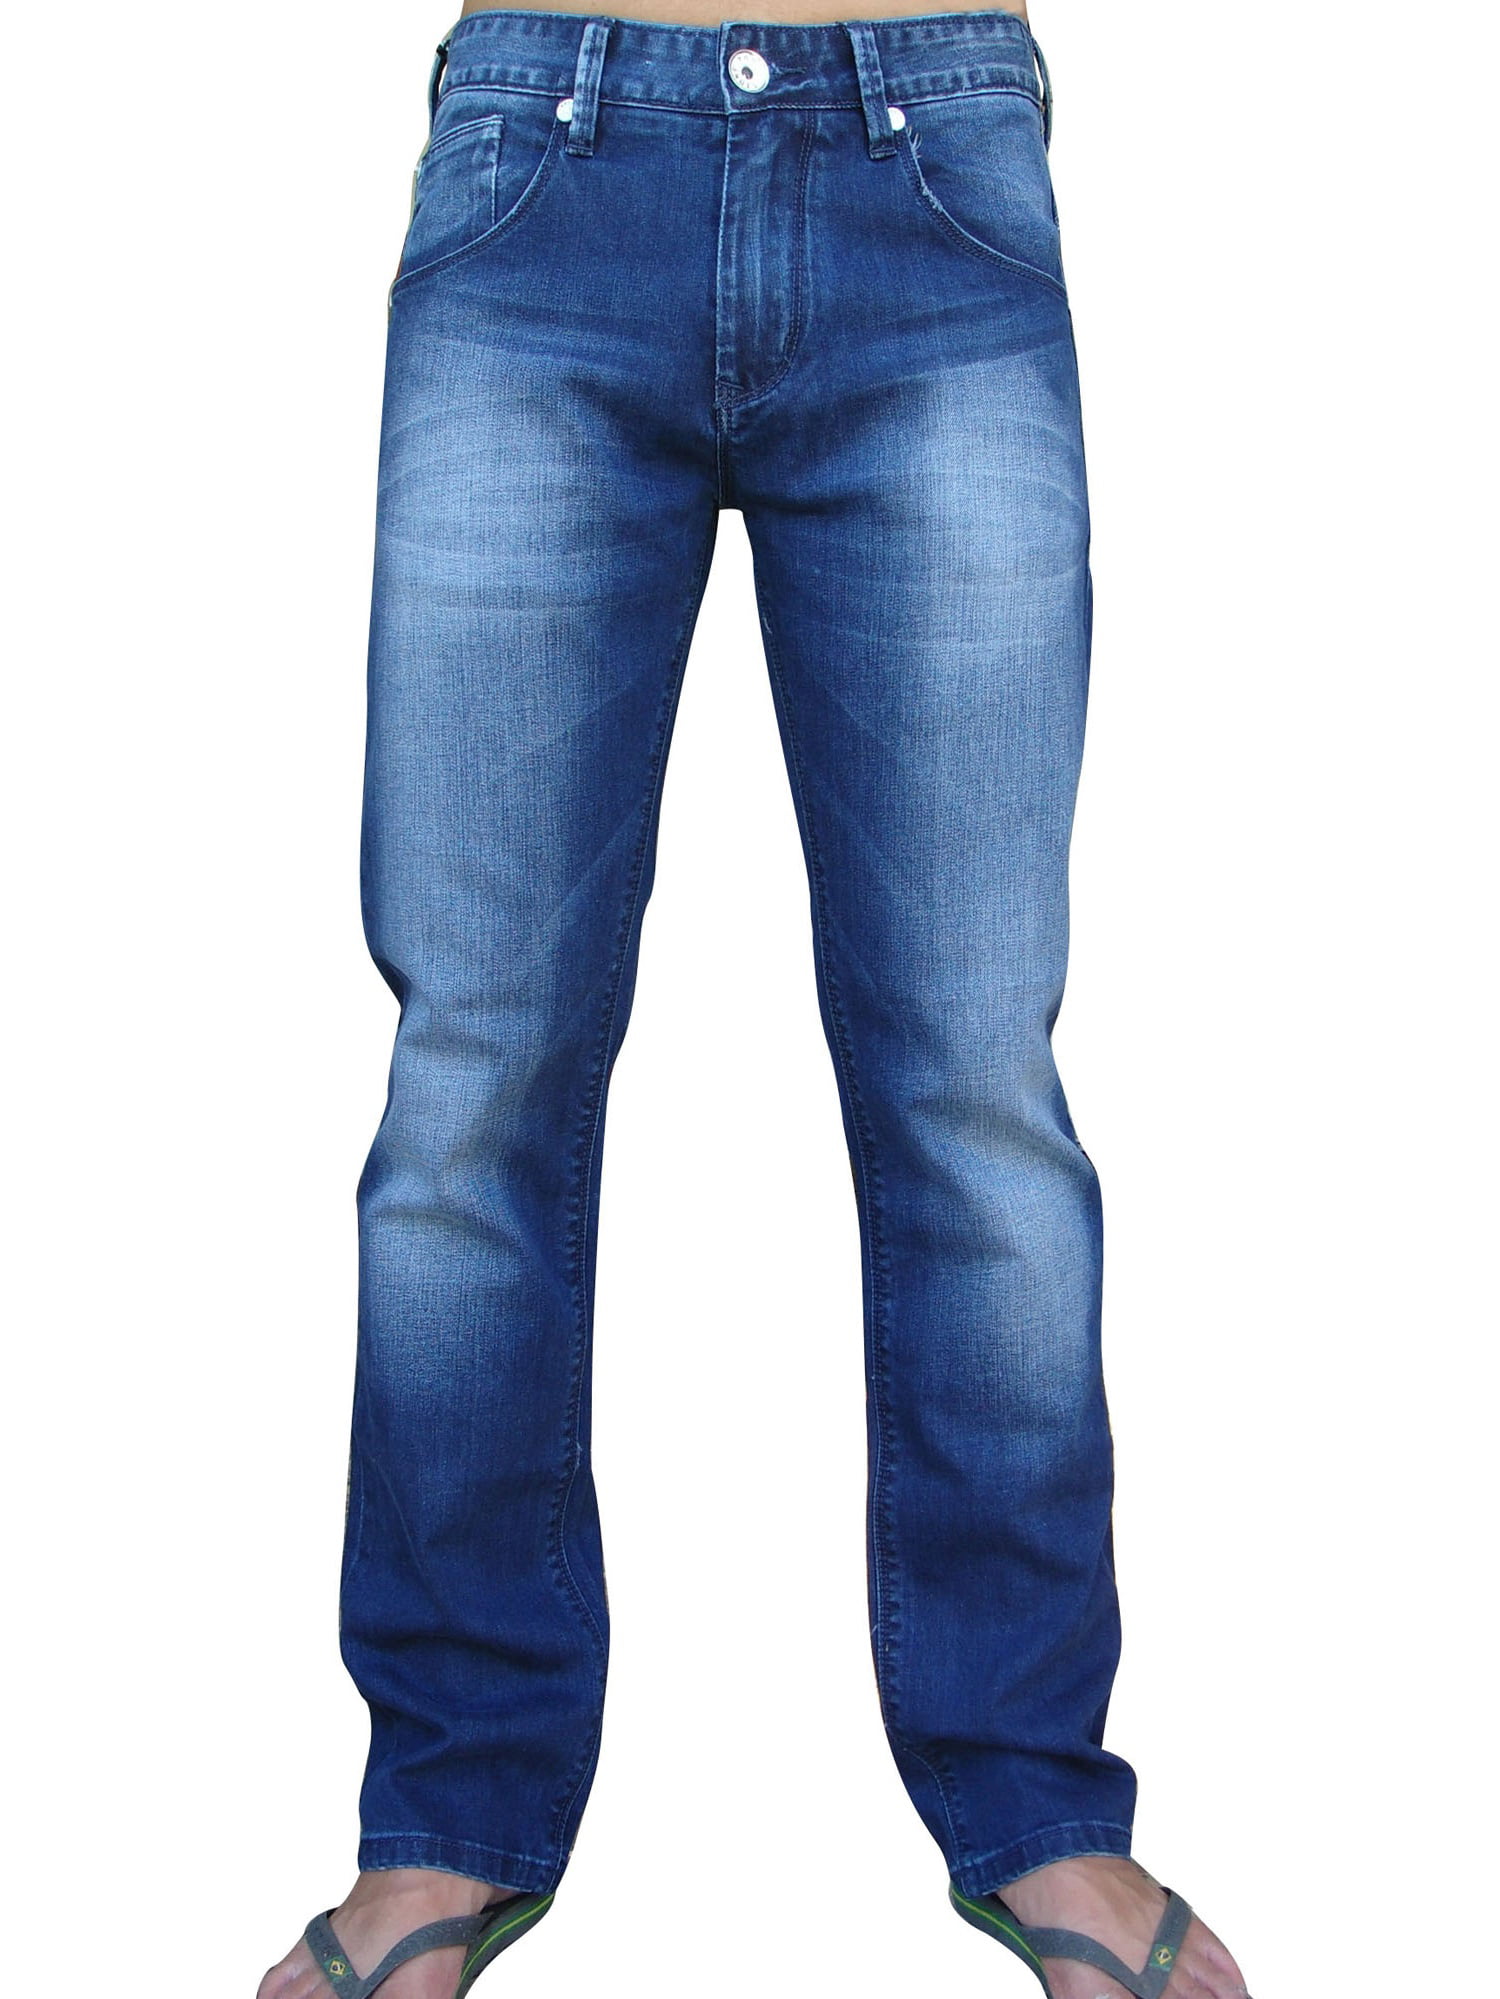 Stone Touch Jeans - StoneTouch Men's Regular Fit Jeans 301-36L ...